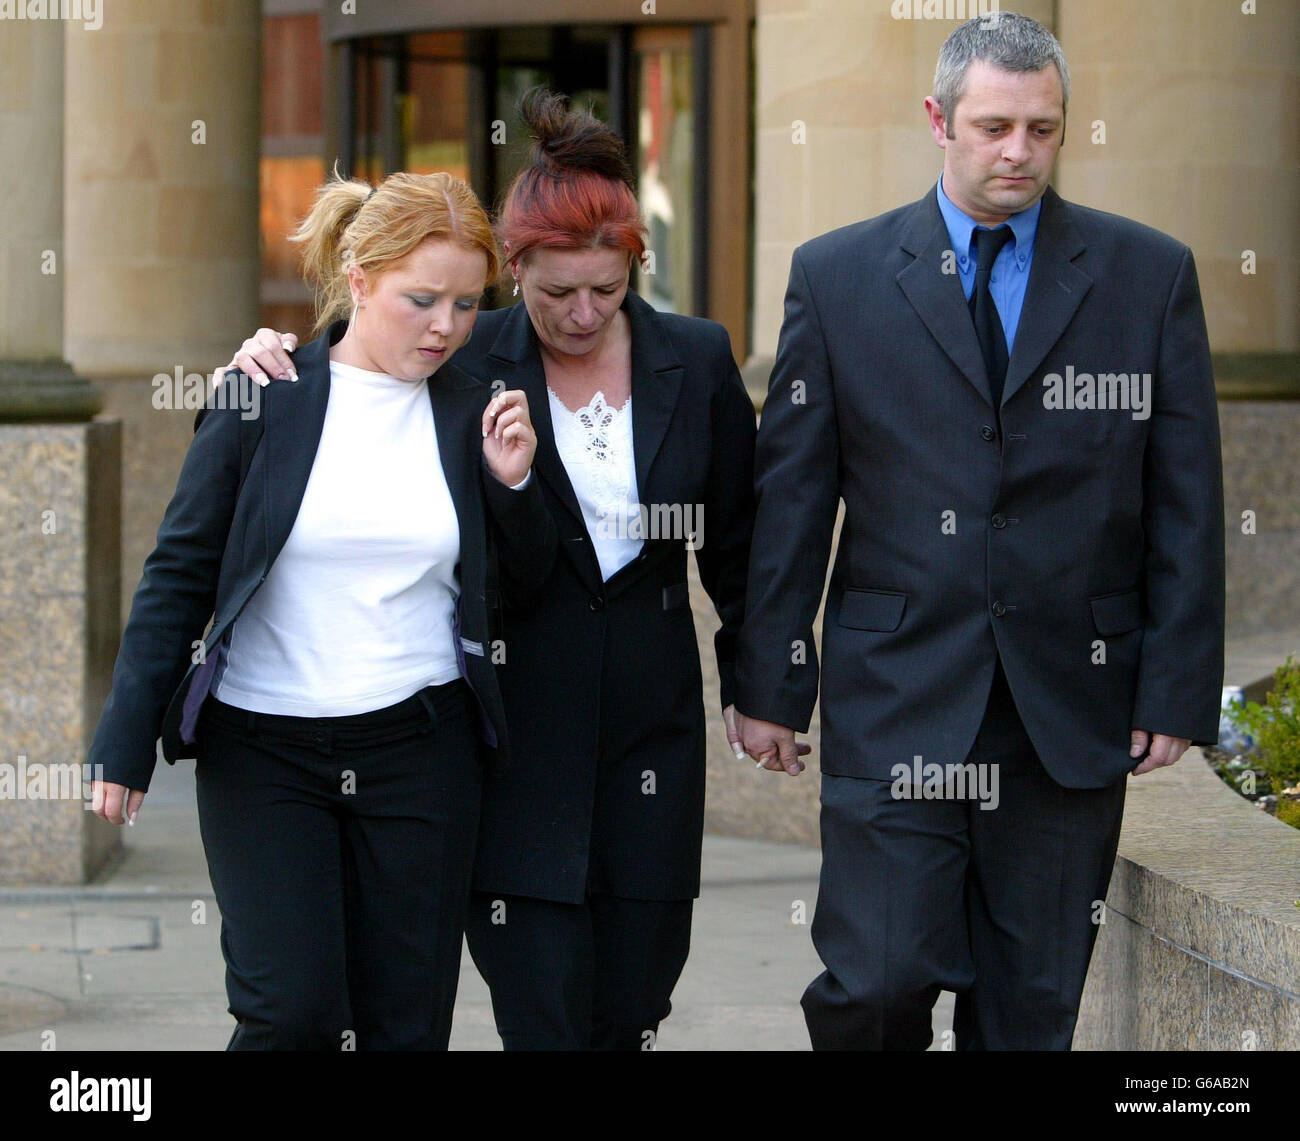 The family of a former Soldier Daniel Hutcheson leaving court after sentence was past on two men that killed her son. Lorraine O'Connor (Daniel's Mother) middle, Kevin Sweeney (Partner of Lorraine O'Connor) and Leigh Ann Hutcheson (Daniel's Sister). * Christopher Hutcheson, 23, strangled his cousin Daniel Hutcheson with a piece of rope in November 2001, as Andrew Ferguson, 19, looked on. Stock Photo